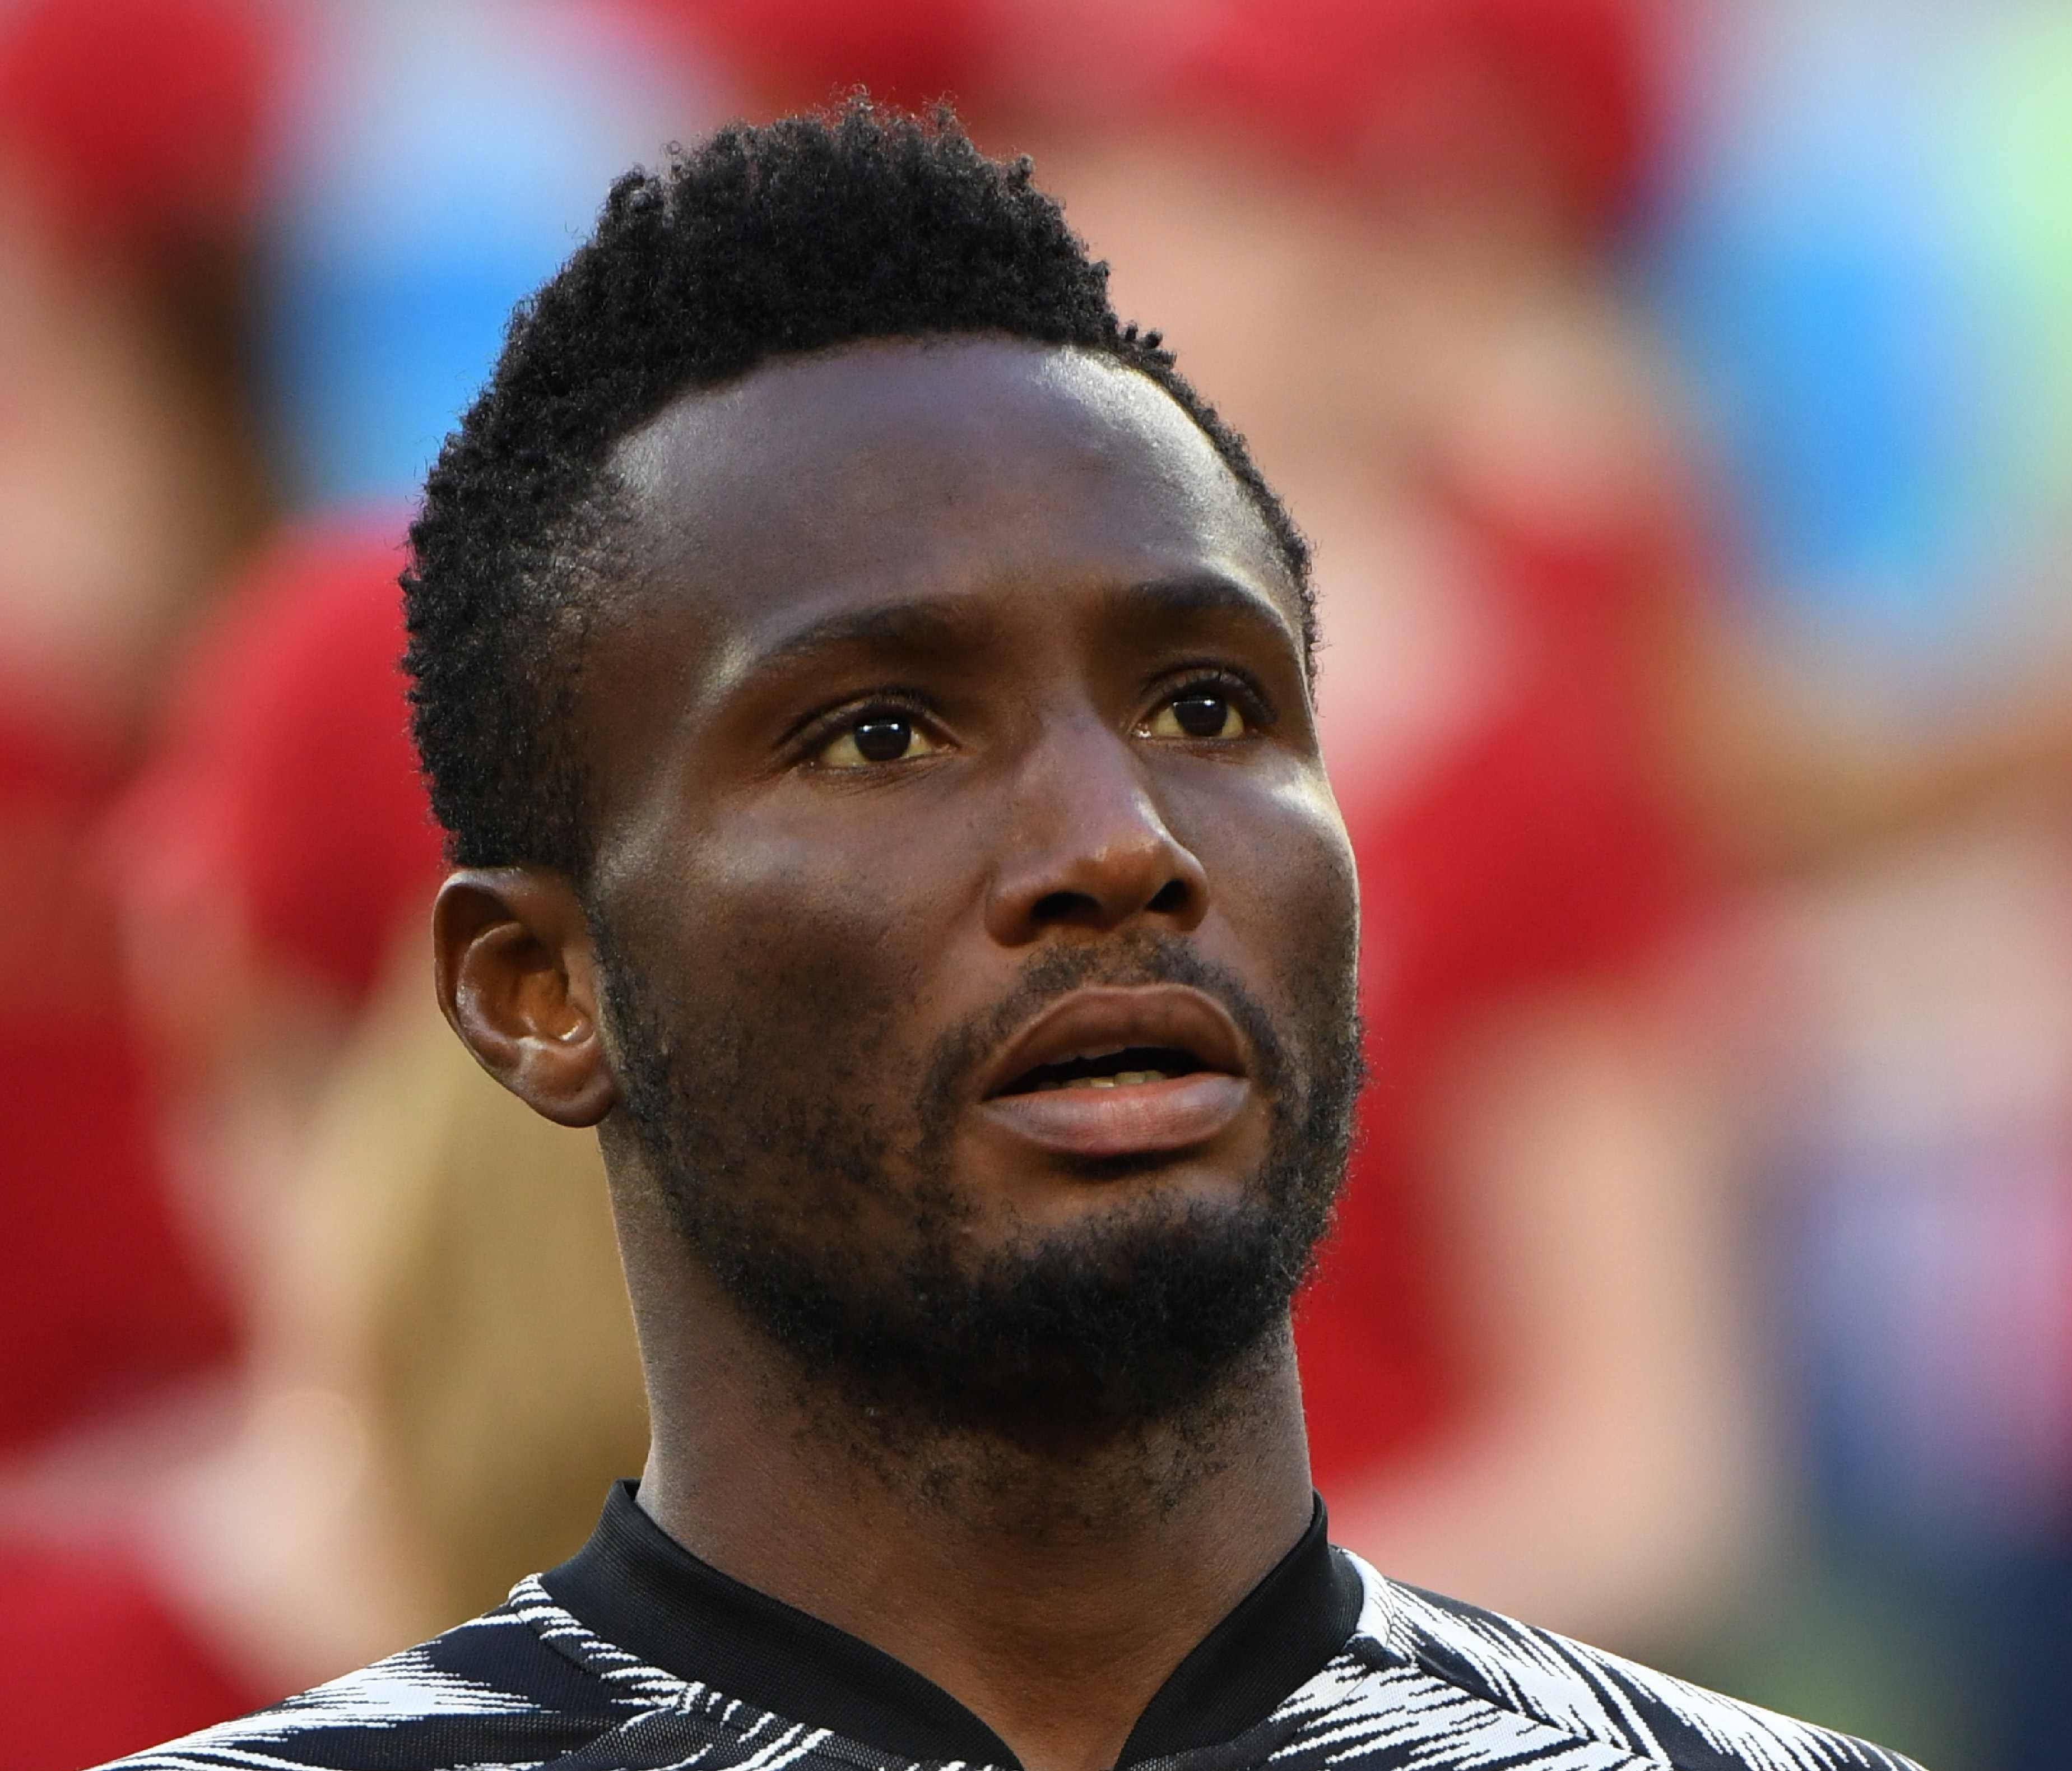 Nigeria's midfielder John Obi Mikel before a game in the group stage.